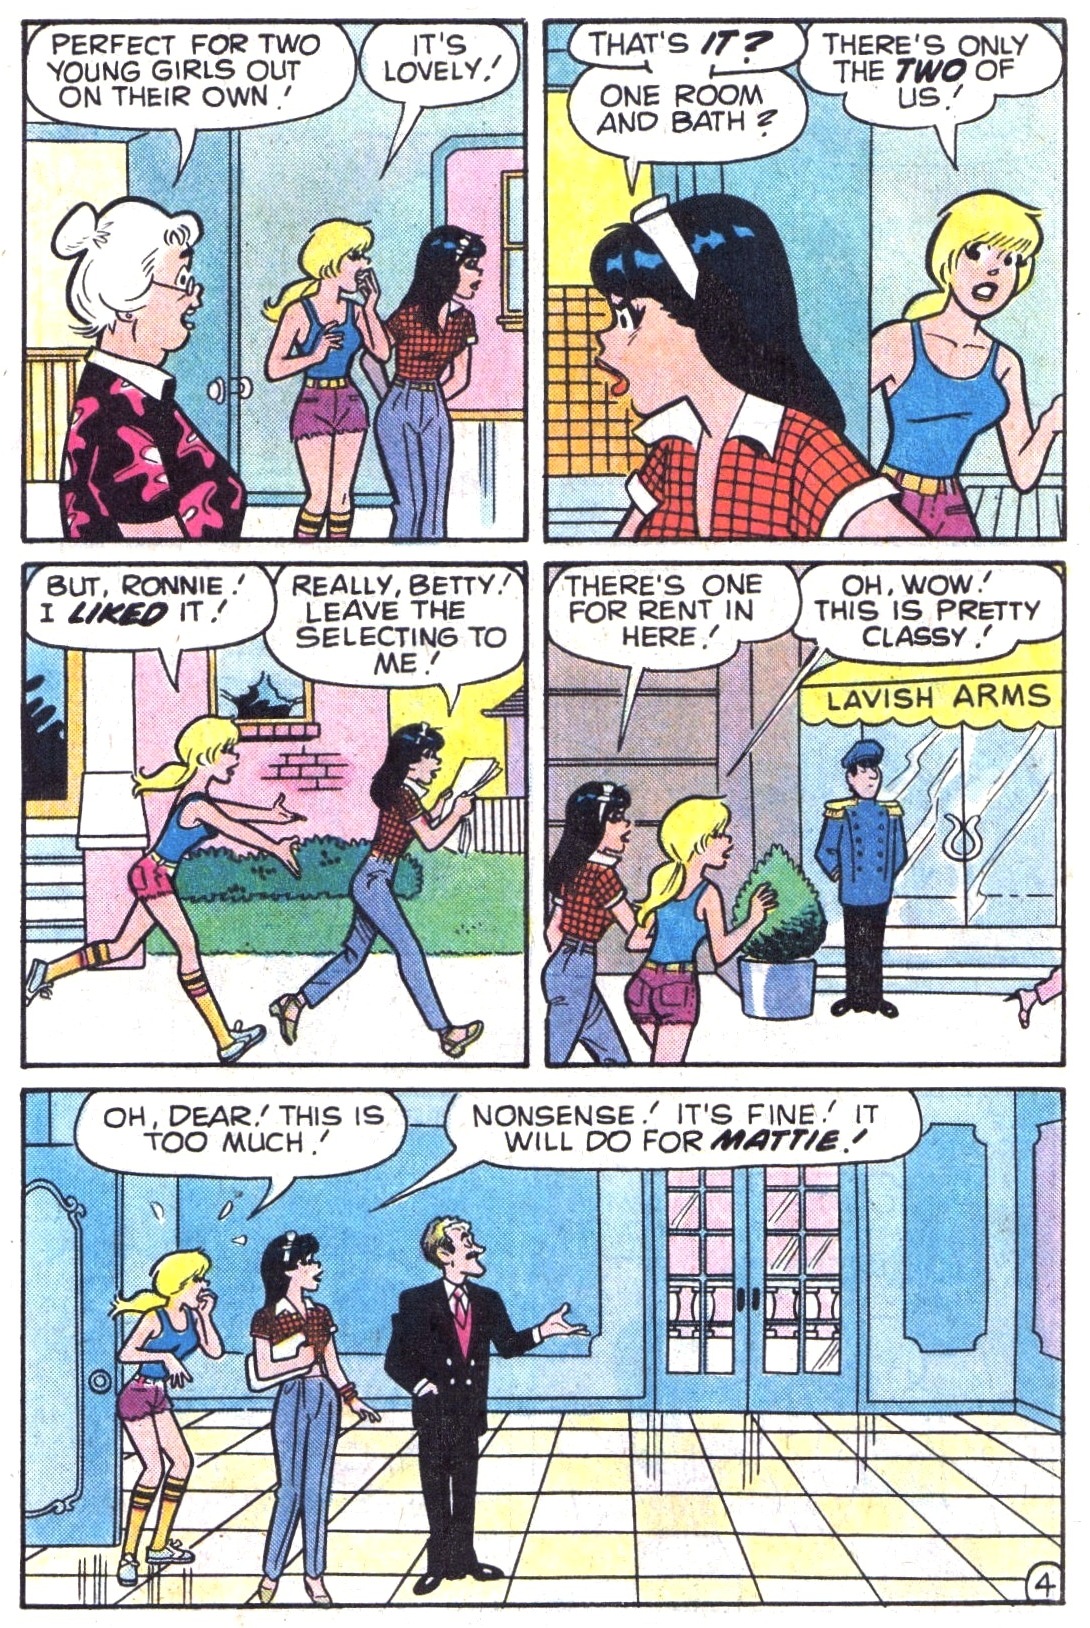 Read online Archie's Girls Betty and Veronica comic -  Issue #297 - 6